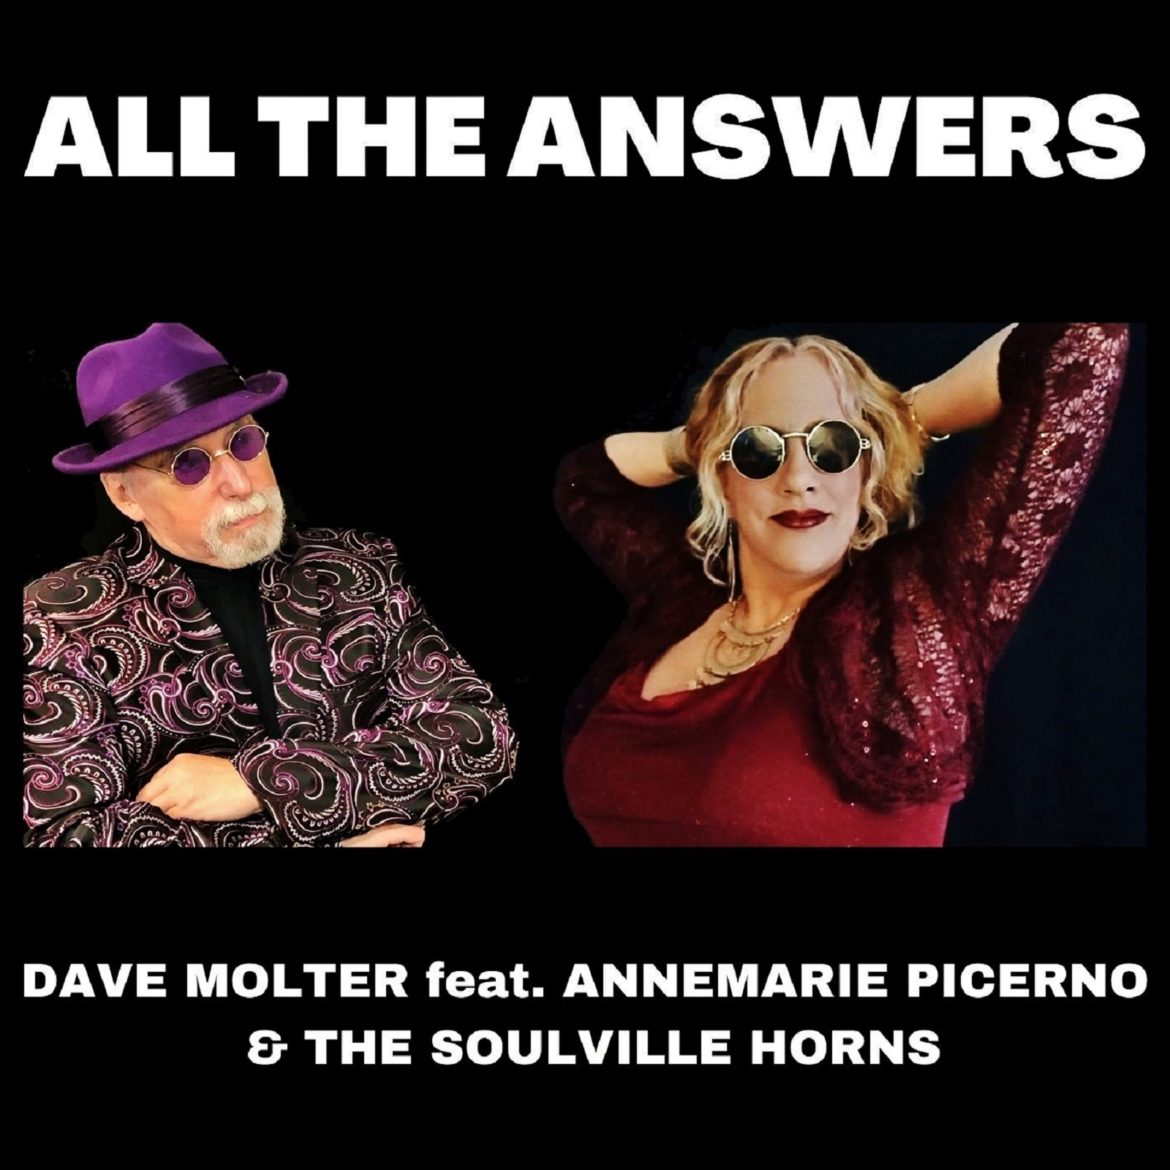 Dave Molter, Annemarie Picerno Display Perfect Synergy In New Single ‘All the Answers’